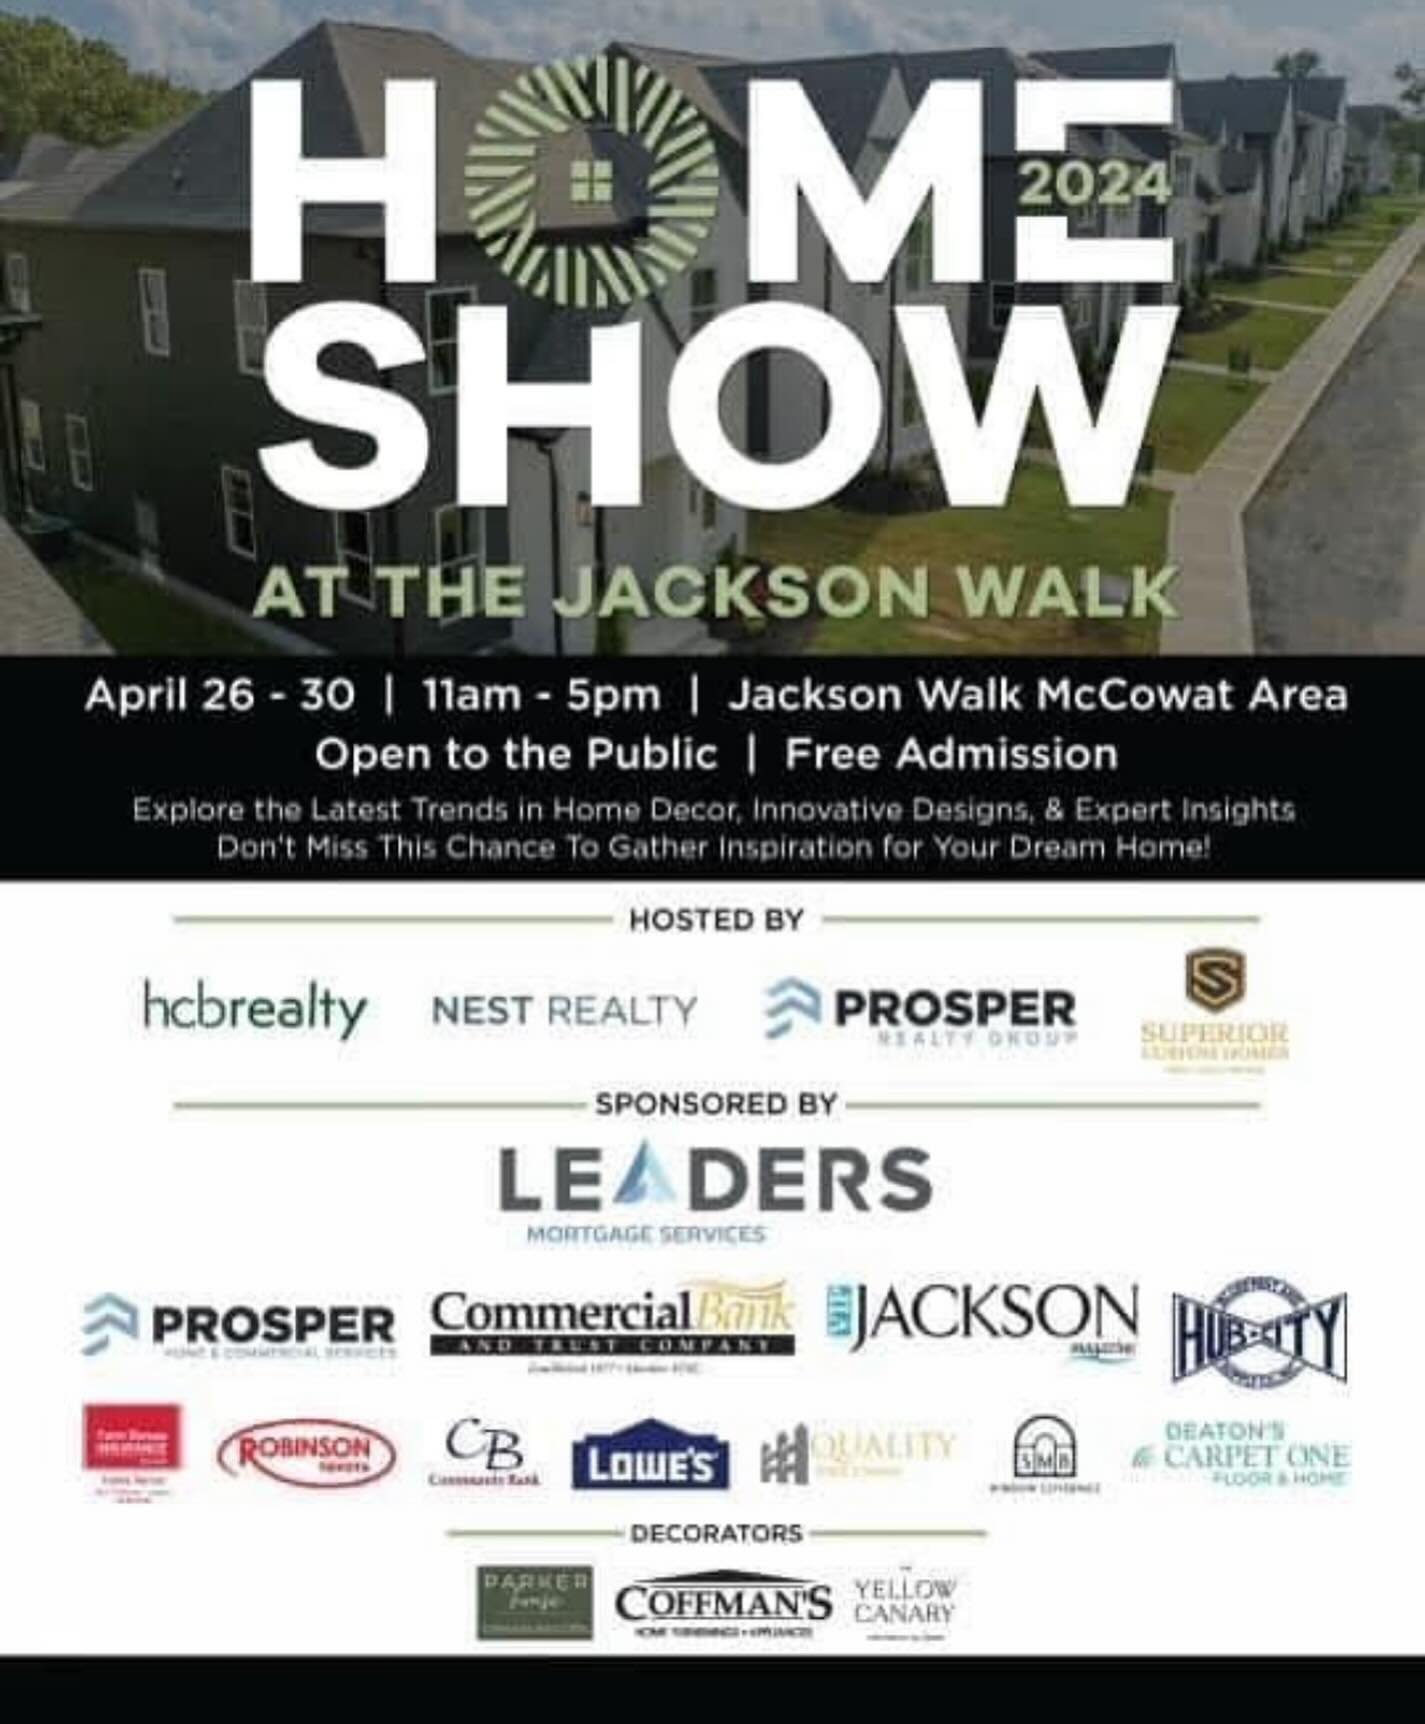 Going on now! These incredible homes by @builtbysuperior will blow you away. See them this weekend at The Jackson Walk on McCowat.